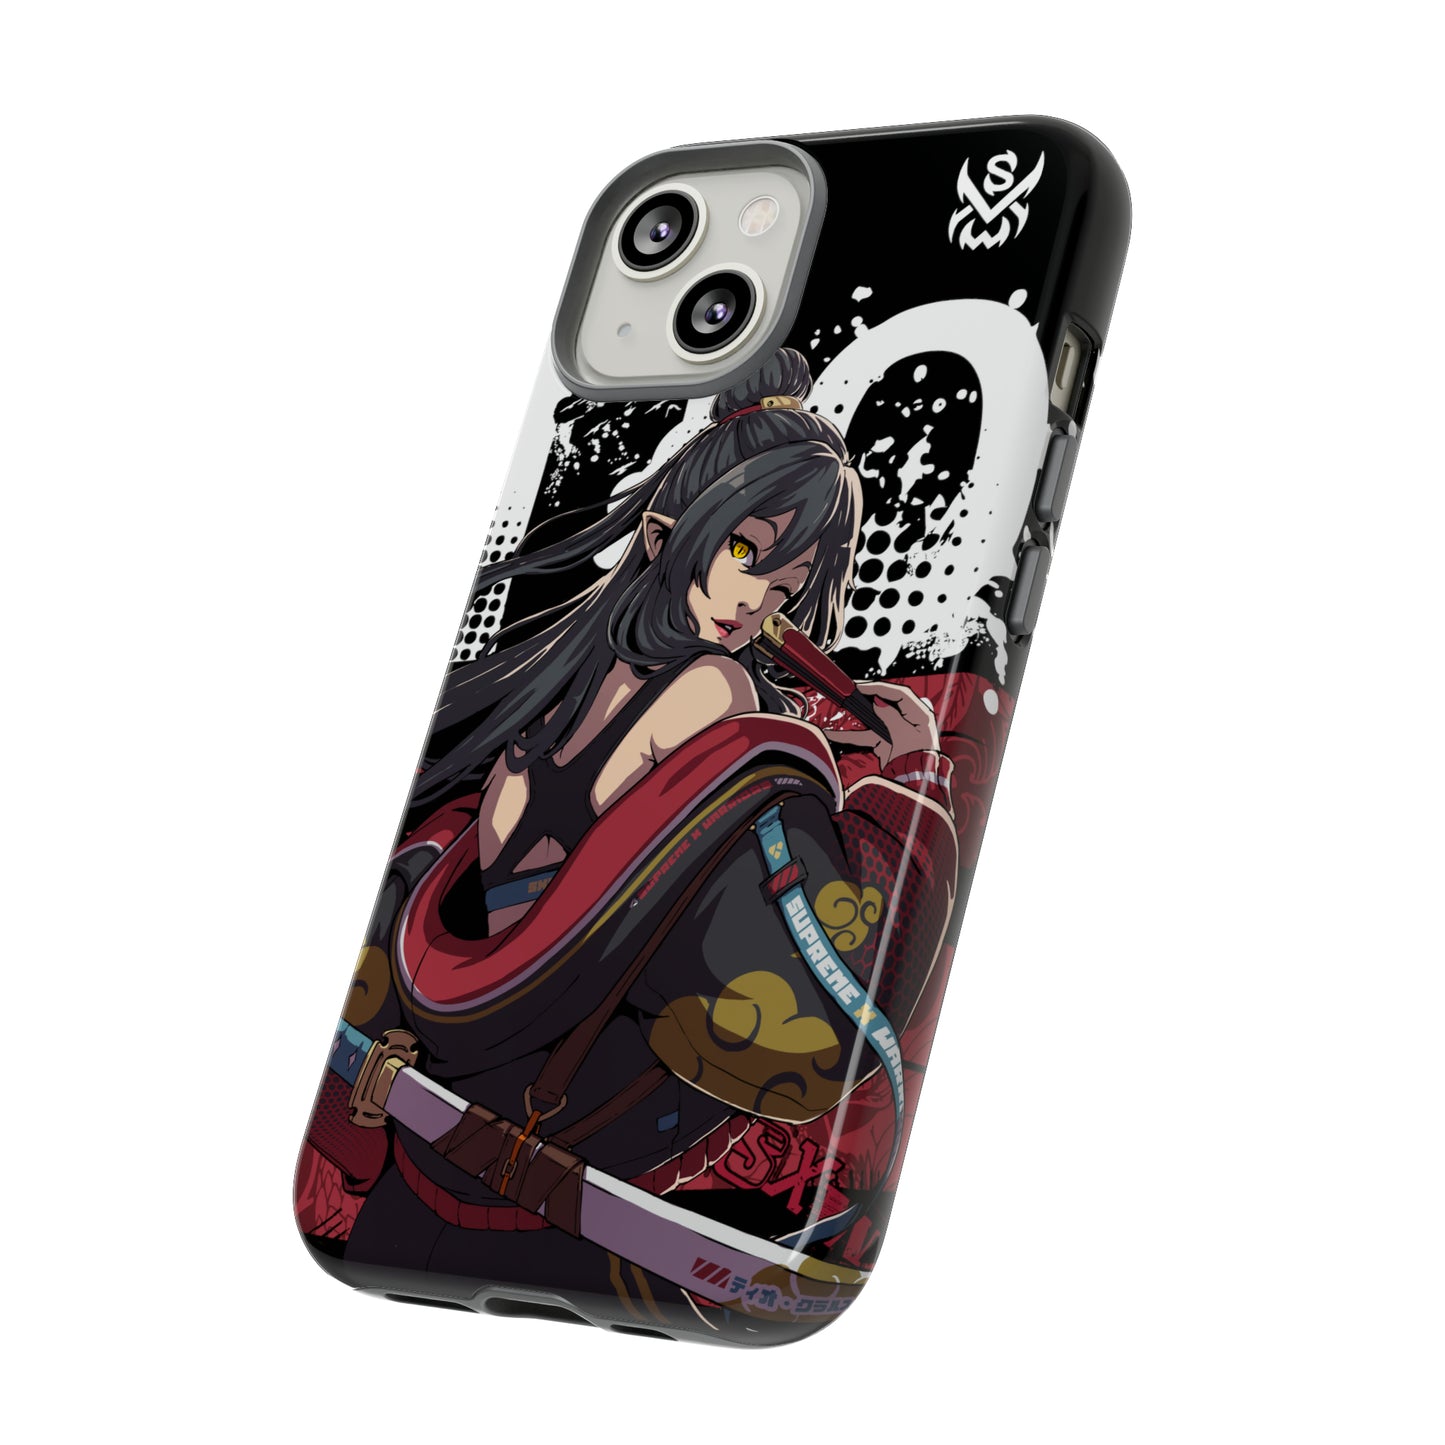 Dragon / iPhone Cases - LIMITED